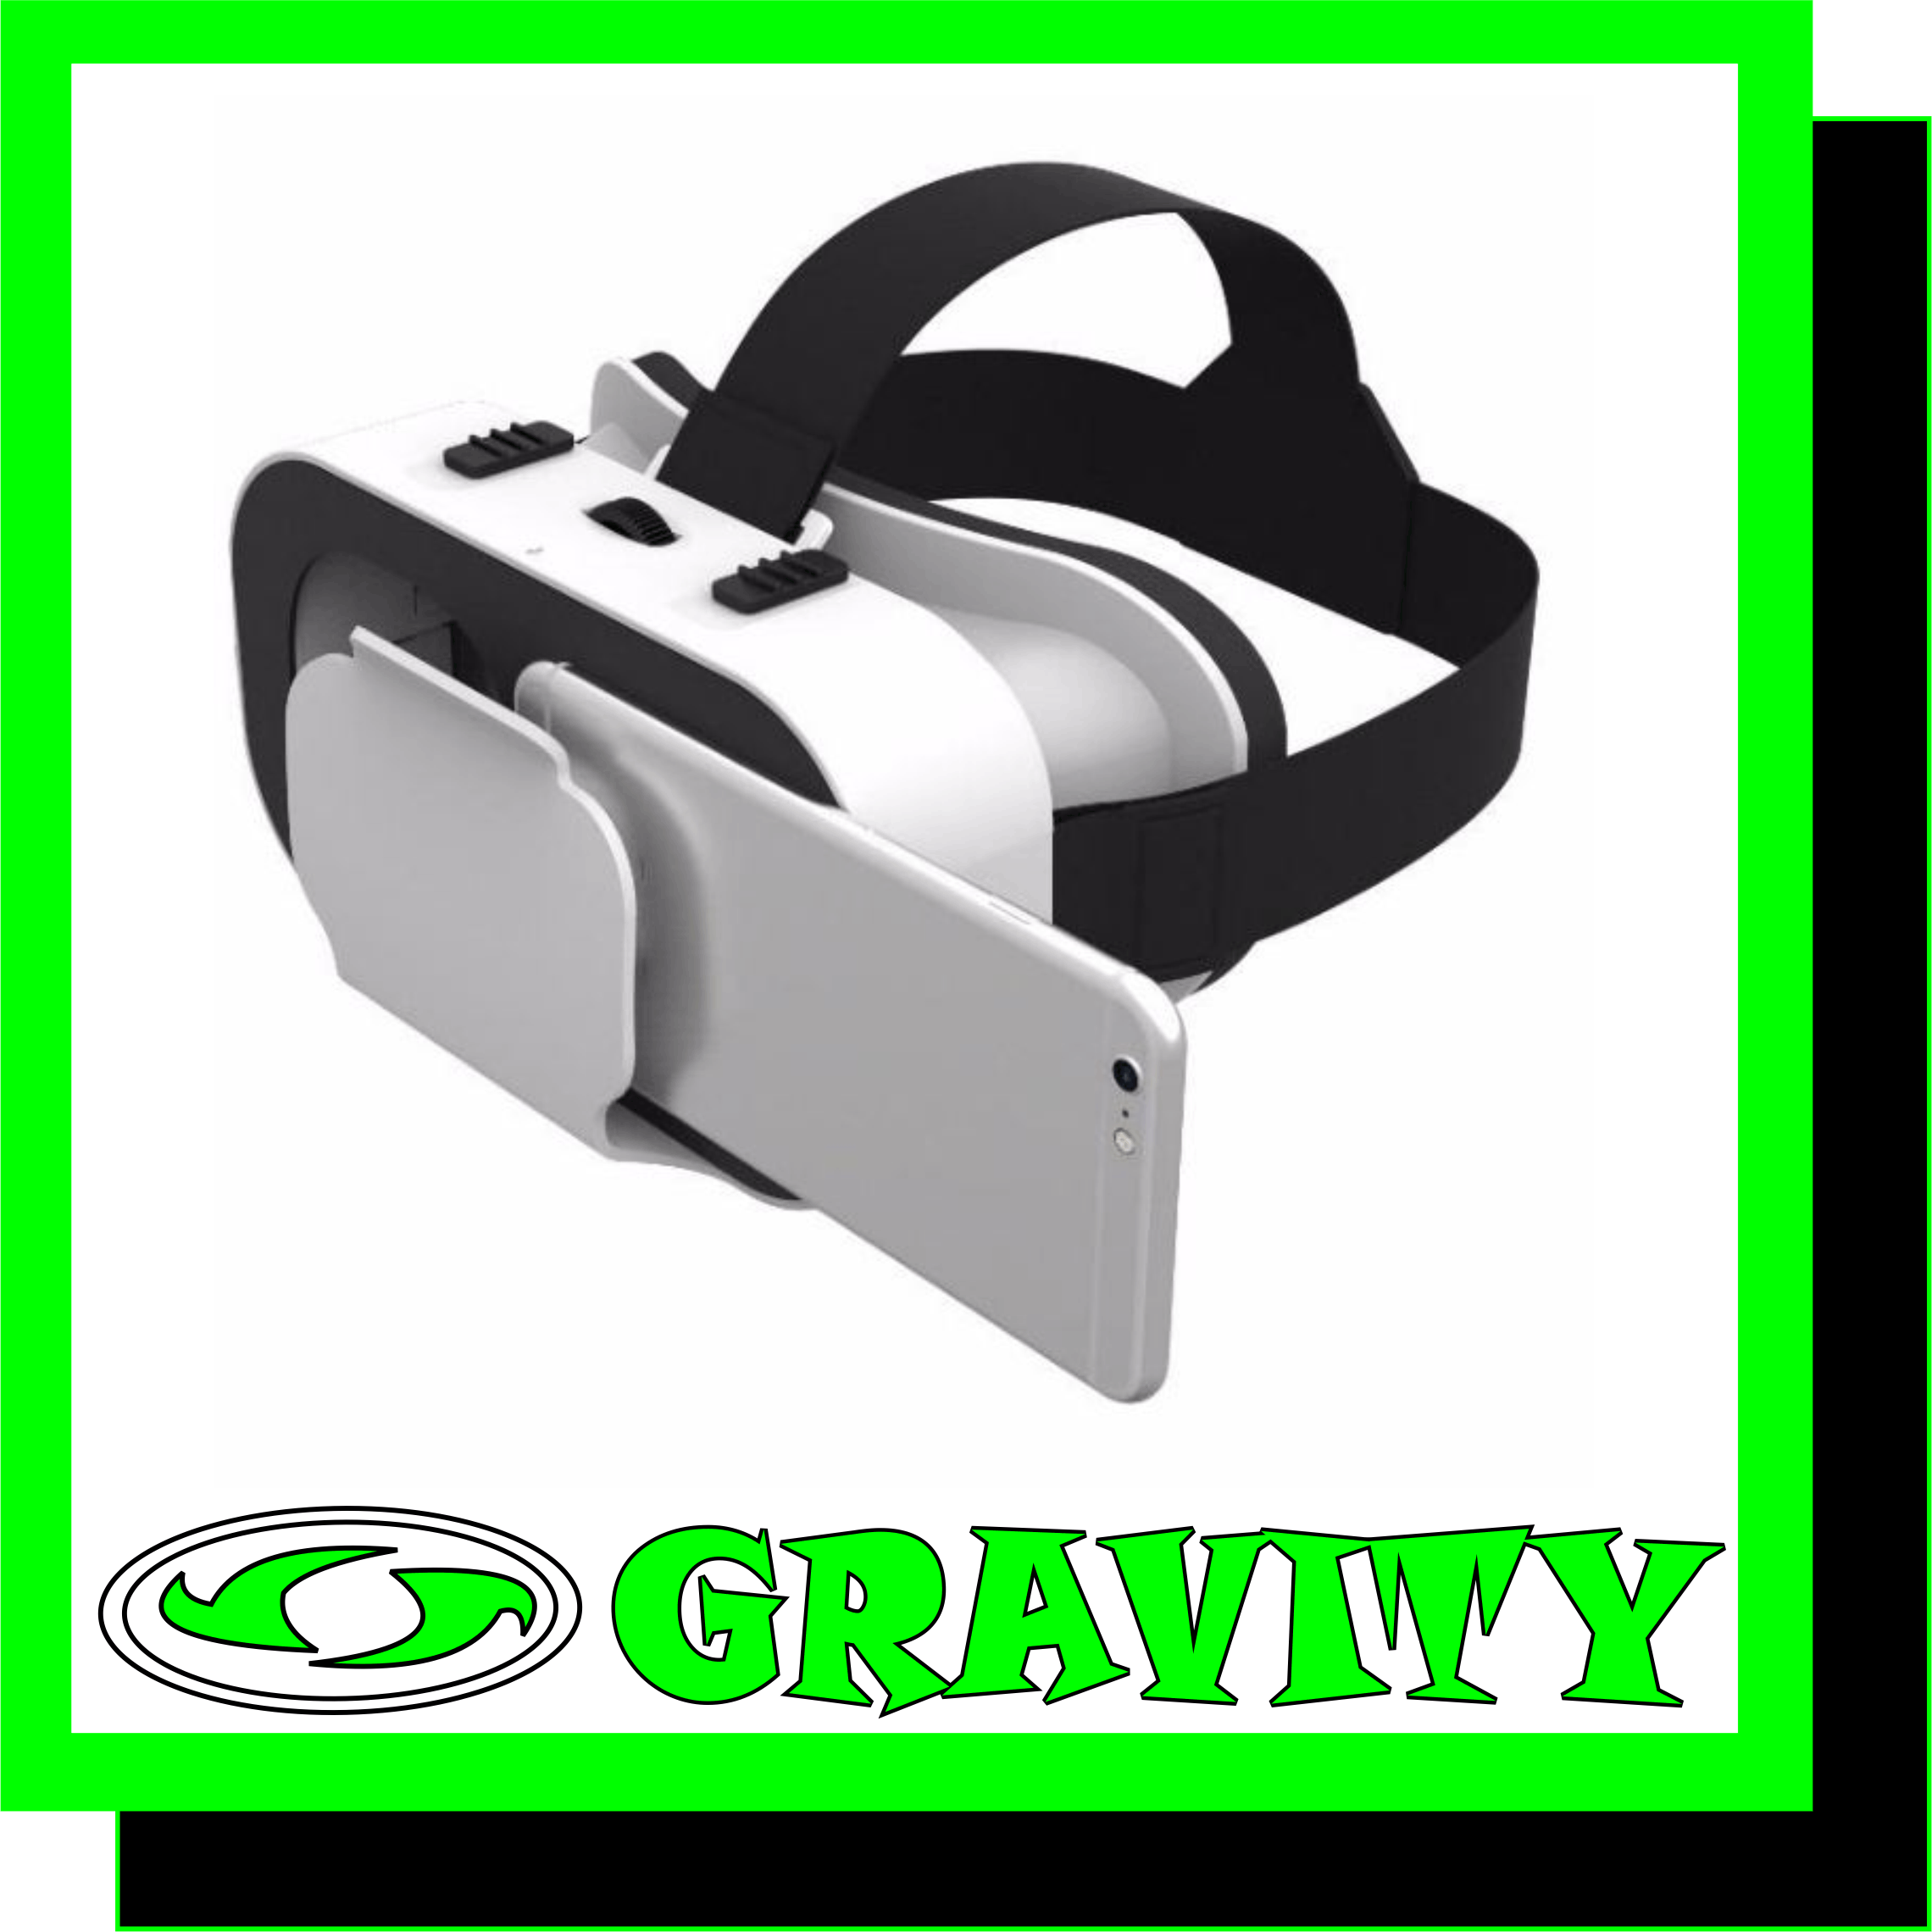 Description: This Virtual Reality Headset 3D VR Glasses can fulfill all your dreams of watching 3D movies and play immersive games at home. Just with a smart phone, you can turn 2D movies to 3D movies at once. What`s more, adopting 42mm aspheric optical resin lenses, 100° large FOV takes you into a new world, bringing you HD images and amazing using experience.  Features: Turn 2D movies to 3D movies immediately just with a smart phone. You can greatly enjoy 3D movies in your mobile phone. It`s perfectly compatible with Android iOS smart phones from 4.7-6.0 inches. Turn your smart phones into your private 3D private theater which brings you wonderful experience of watching movies and playing games. Stay at home, you can also enjoy wonderful 3D movies. Brings you wonderful experience of playing immersive games with gamepad(not included). 360° Panoramic design takes you into a new world, giving you perfect visual enjoyment. Adopting 42mm aspheric optical resin lenses, it it brings you HD images which effectively blocks harmful rays and ease tired eyes aspheric design optical correction. What`more, 100° wide viewing angle is close to human eye real viewing angle. Manually adjust the interpupillary distance for a better visual which is perfectly suitable for shortsightedness within 400°. Comfortable and safe for using.   Specification:   Item Size: 156*101*88 mm  Weight:158g Material: ABS  Color: White Lens: HD Optical Resin Lens Lens Diameter: 42mm Focal Distance Of The Pupil: N/A Phone Support: 4.7" - 6.0" inch